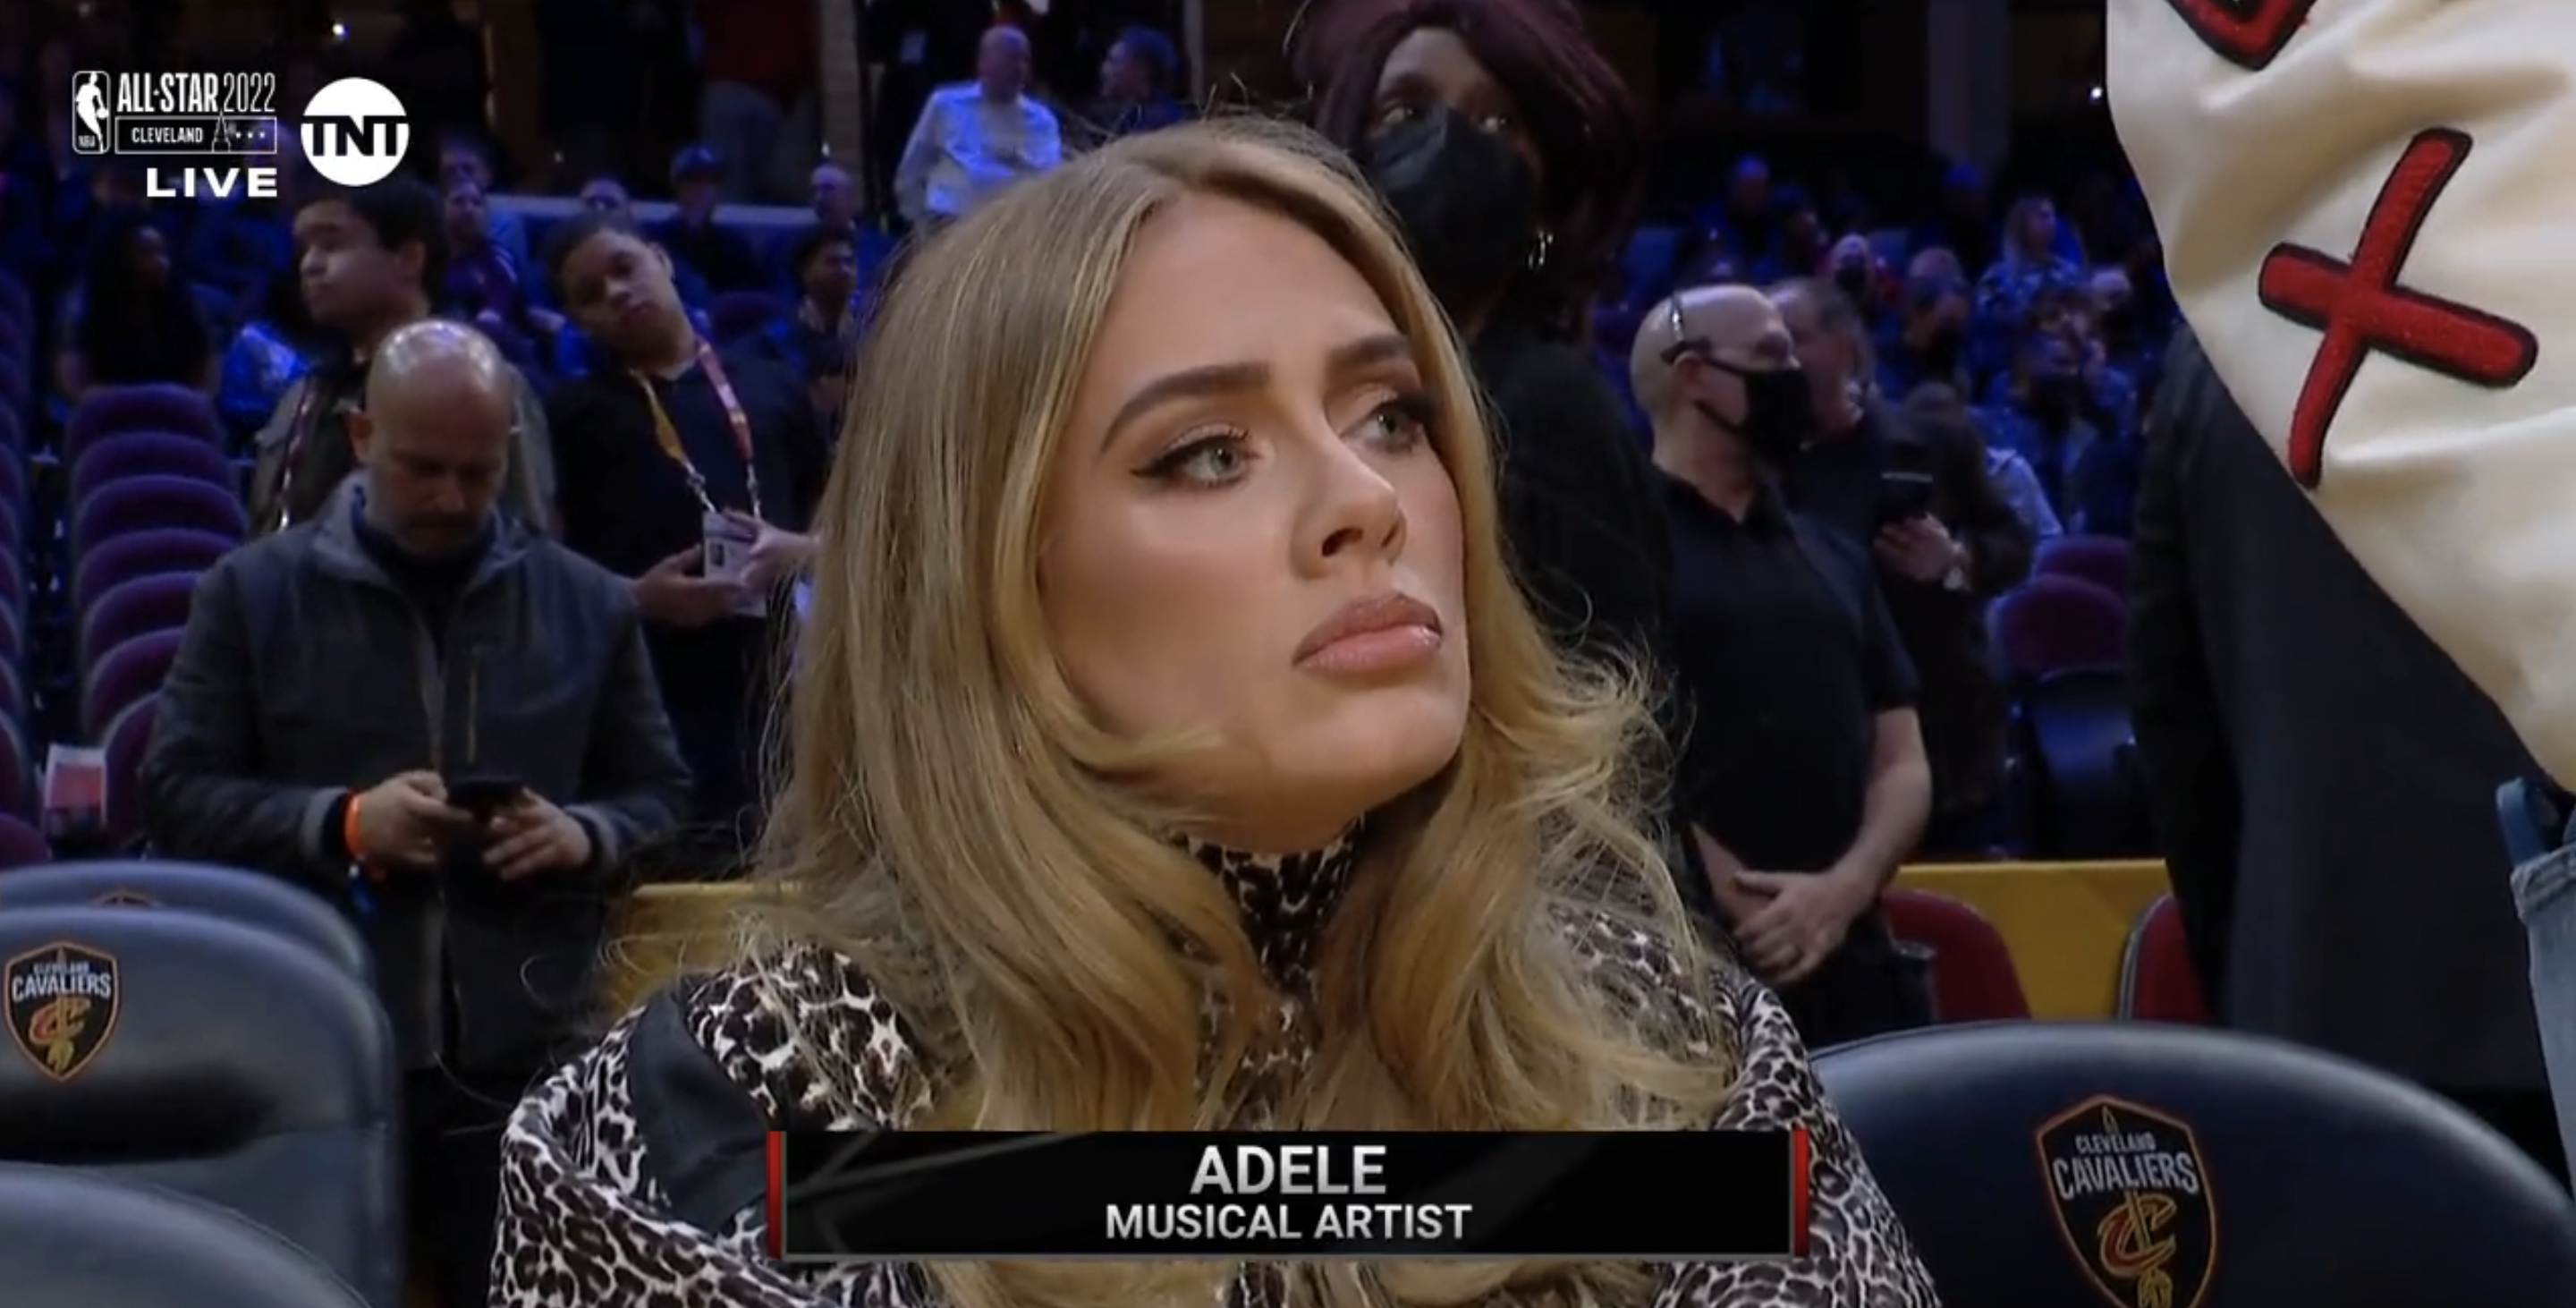 Adele seated at a sports event, looking to the side, wearing a patterned top